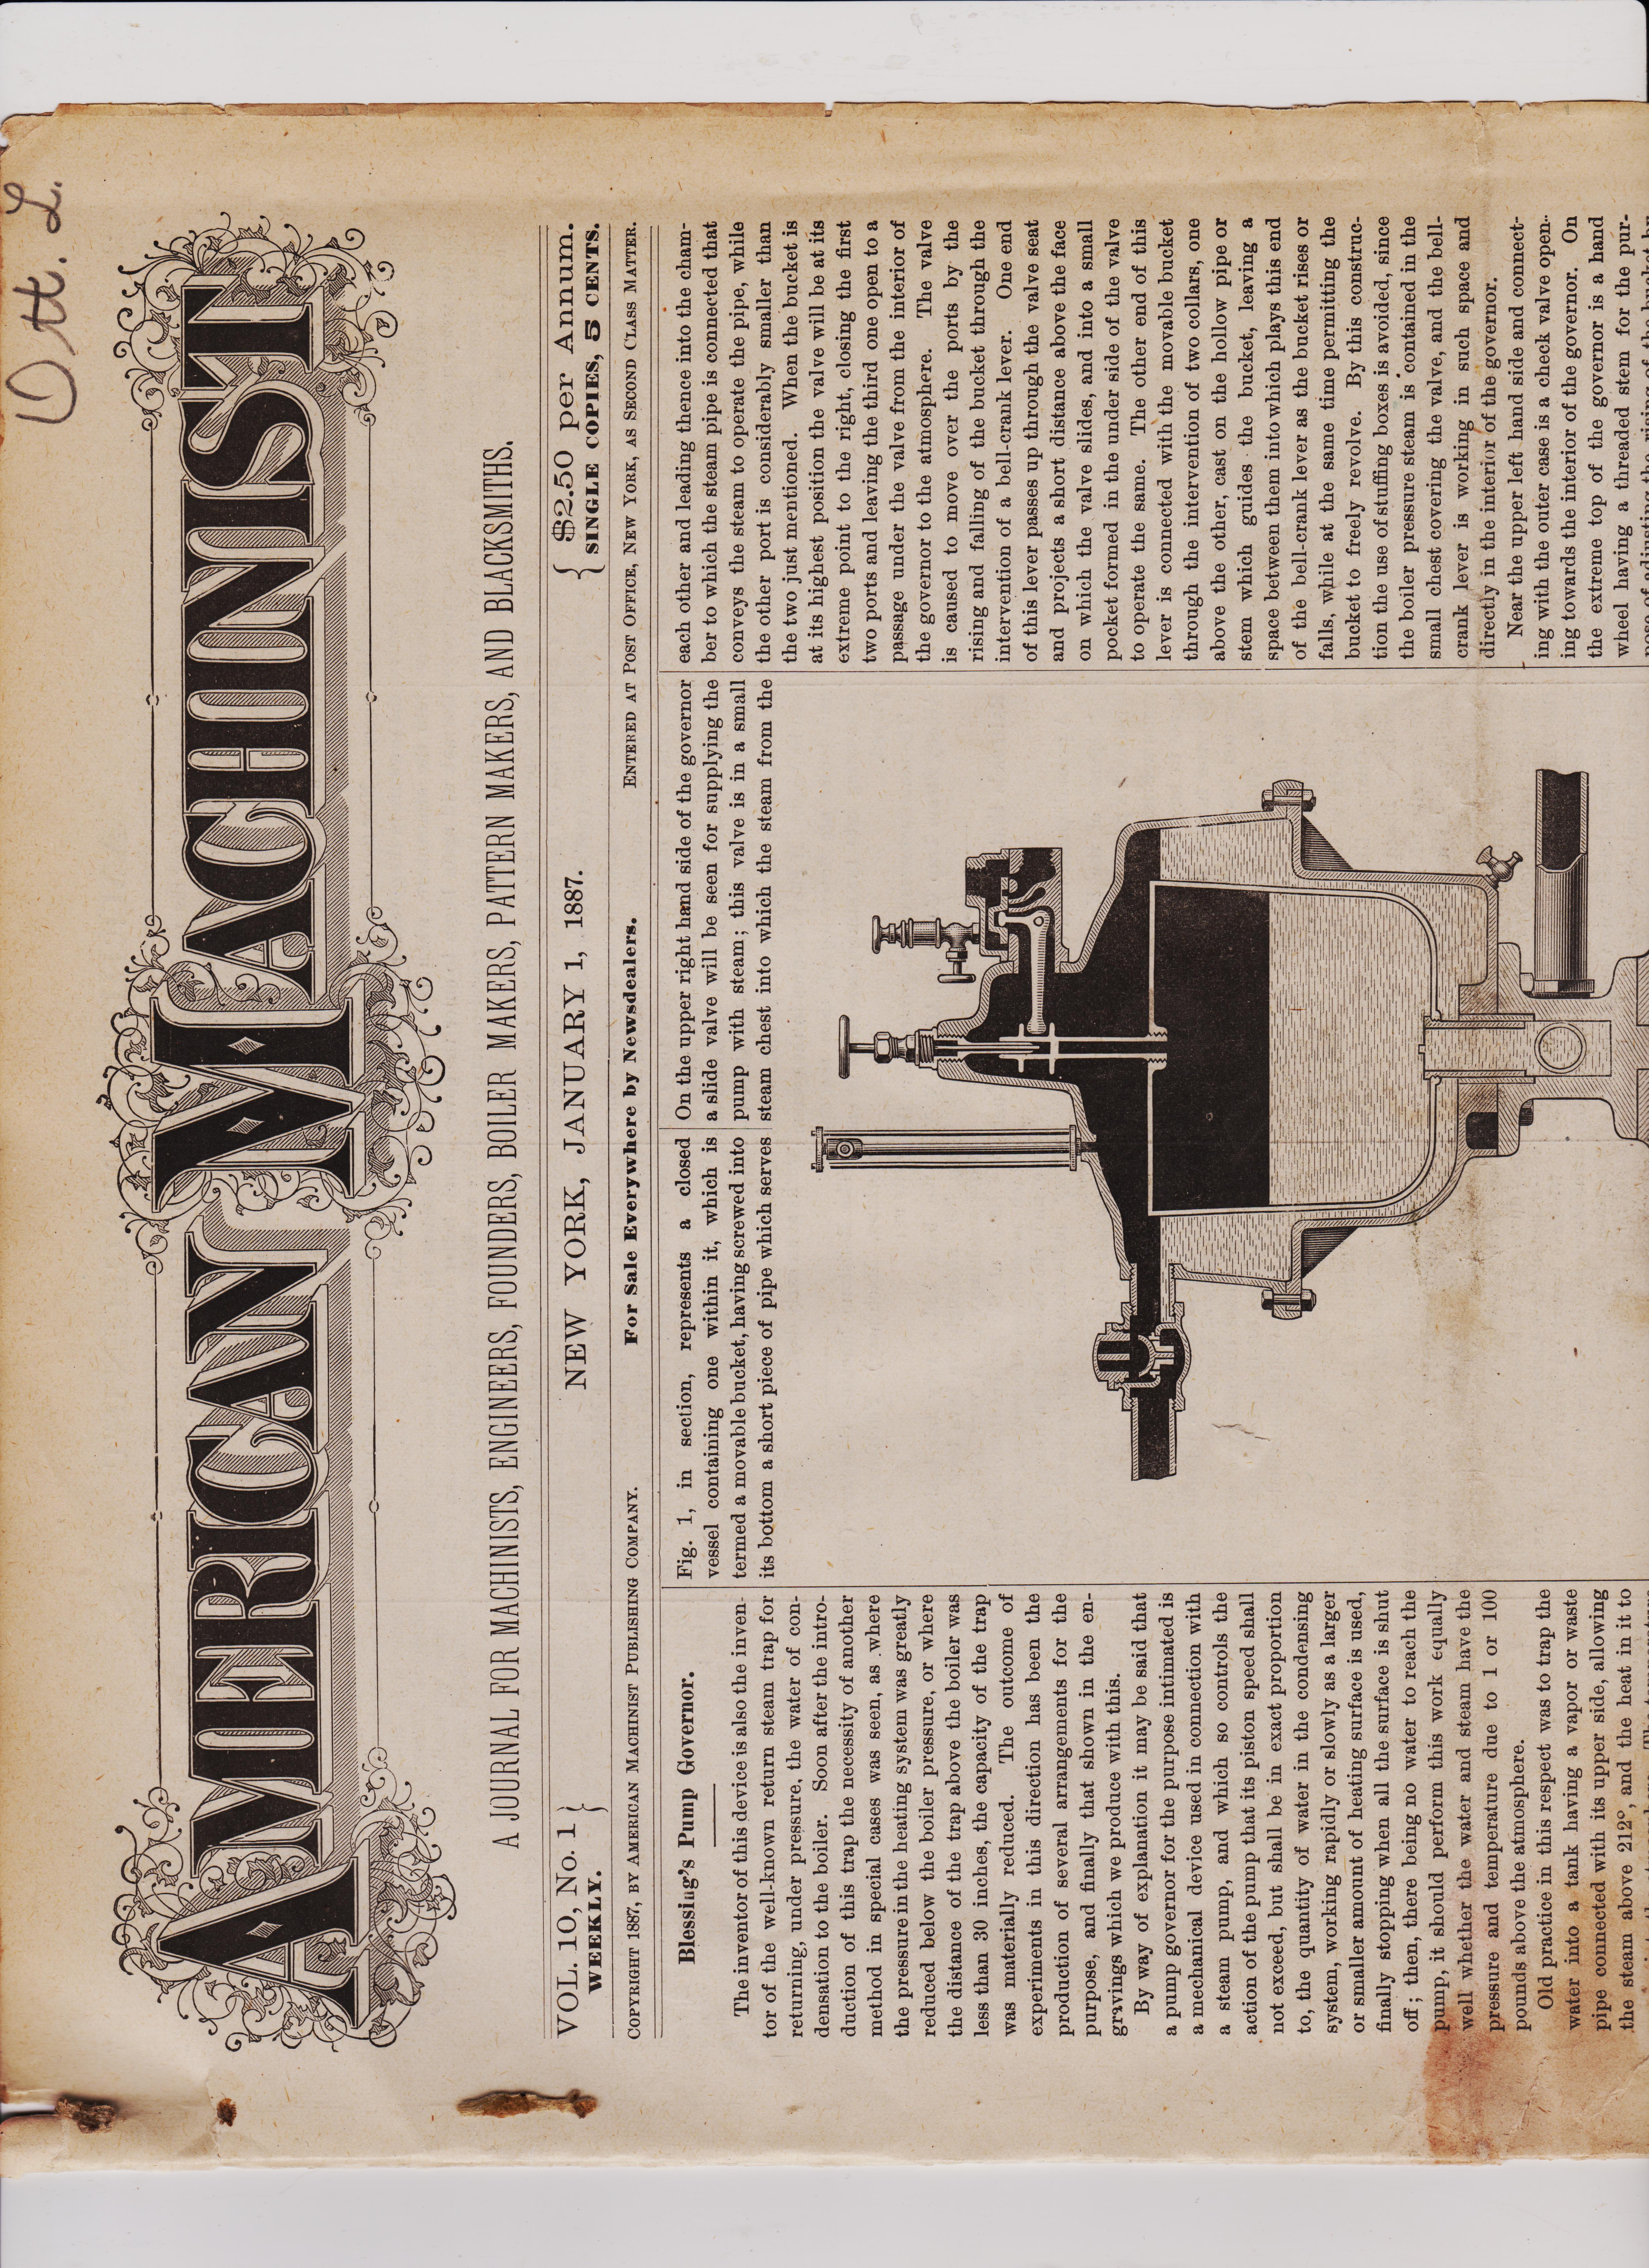 https://antiquemachinery.com/images-American-Machinist-Jan-15-1887/American-Machinist-Jan-15-1887-pg-1cover-top-Niles-large-Vertical-Milling-Machine-formaly-plaing-shaping-Boiler-Explosion.jpeg